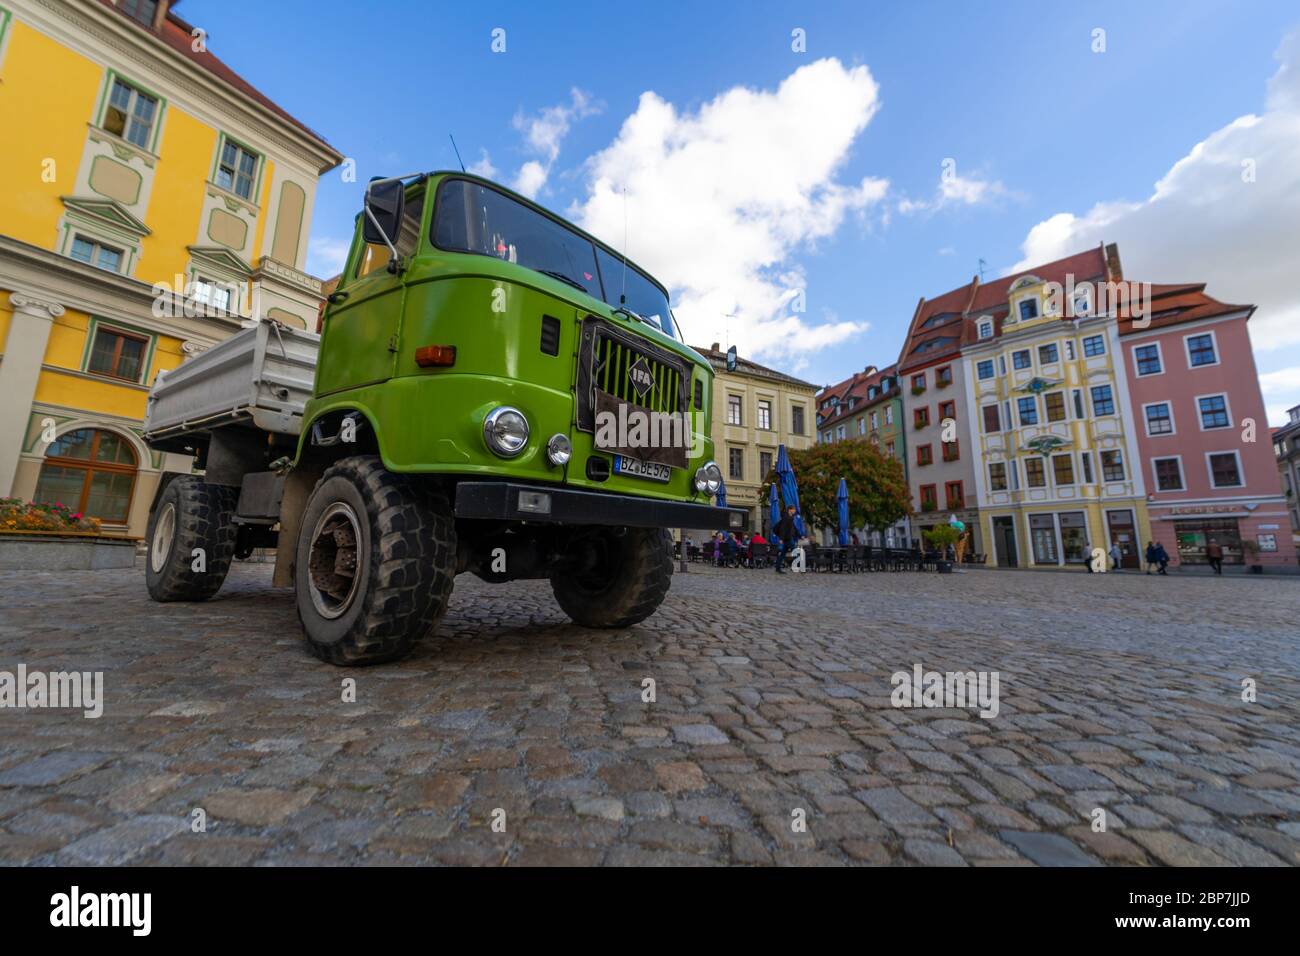 BAUTZEN, GERMANY - OCTOBER 10, 2019: City Hall Square and a medium-duty truck IFA W50 in the foreground. Stock Photo